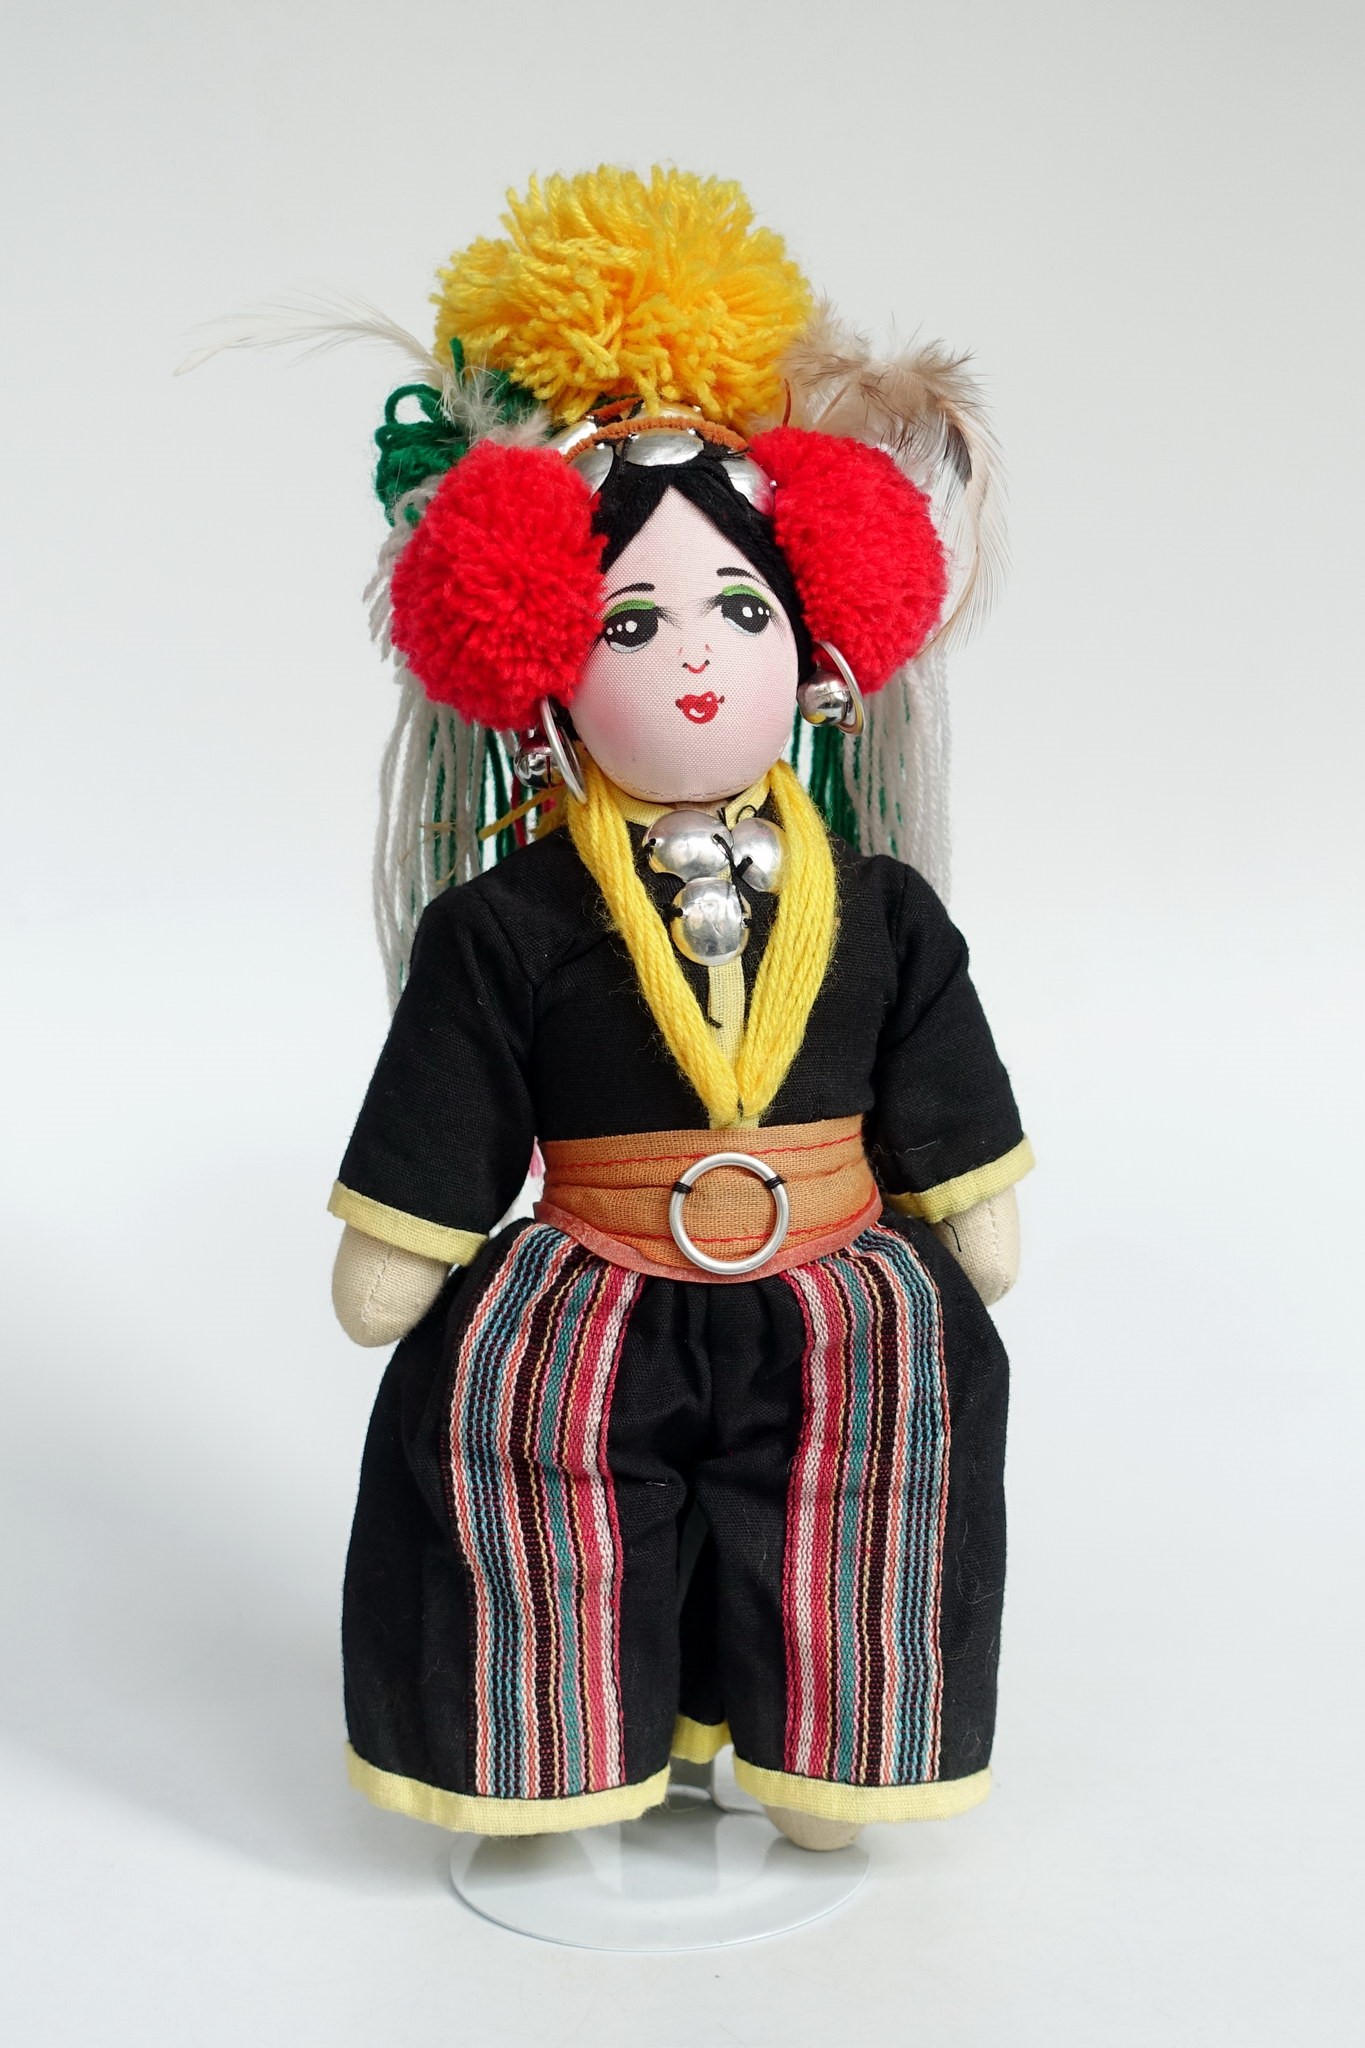 Thailand Doll Akha | National costume dolls from all over the world